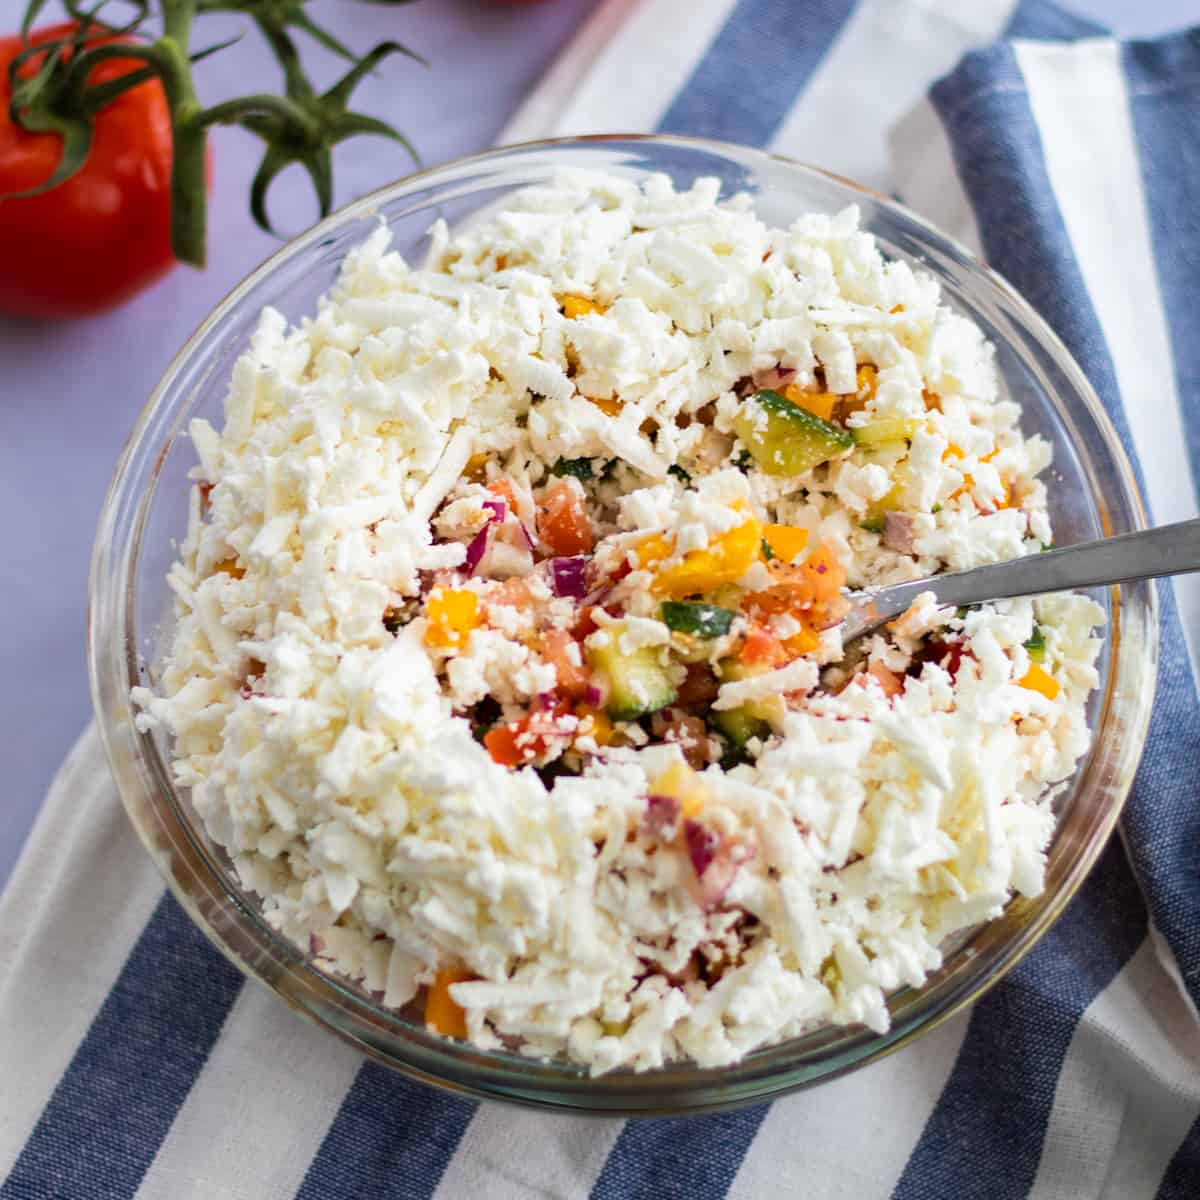 shopska salad topped with feta cheese